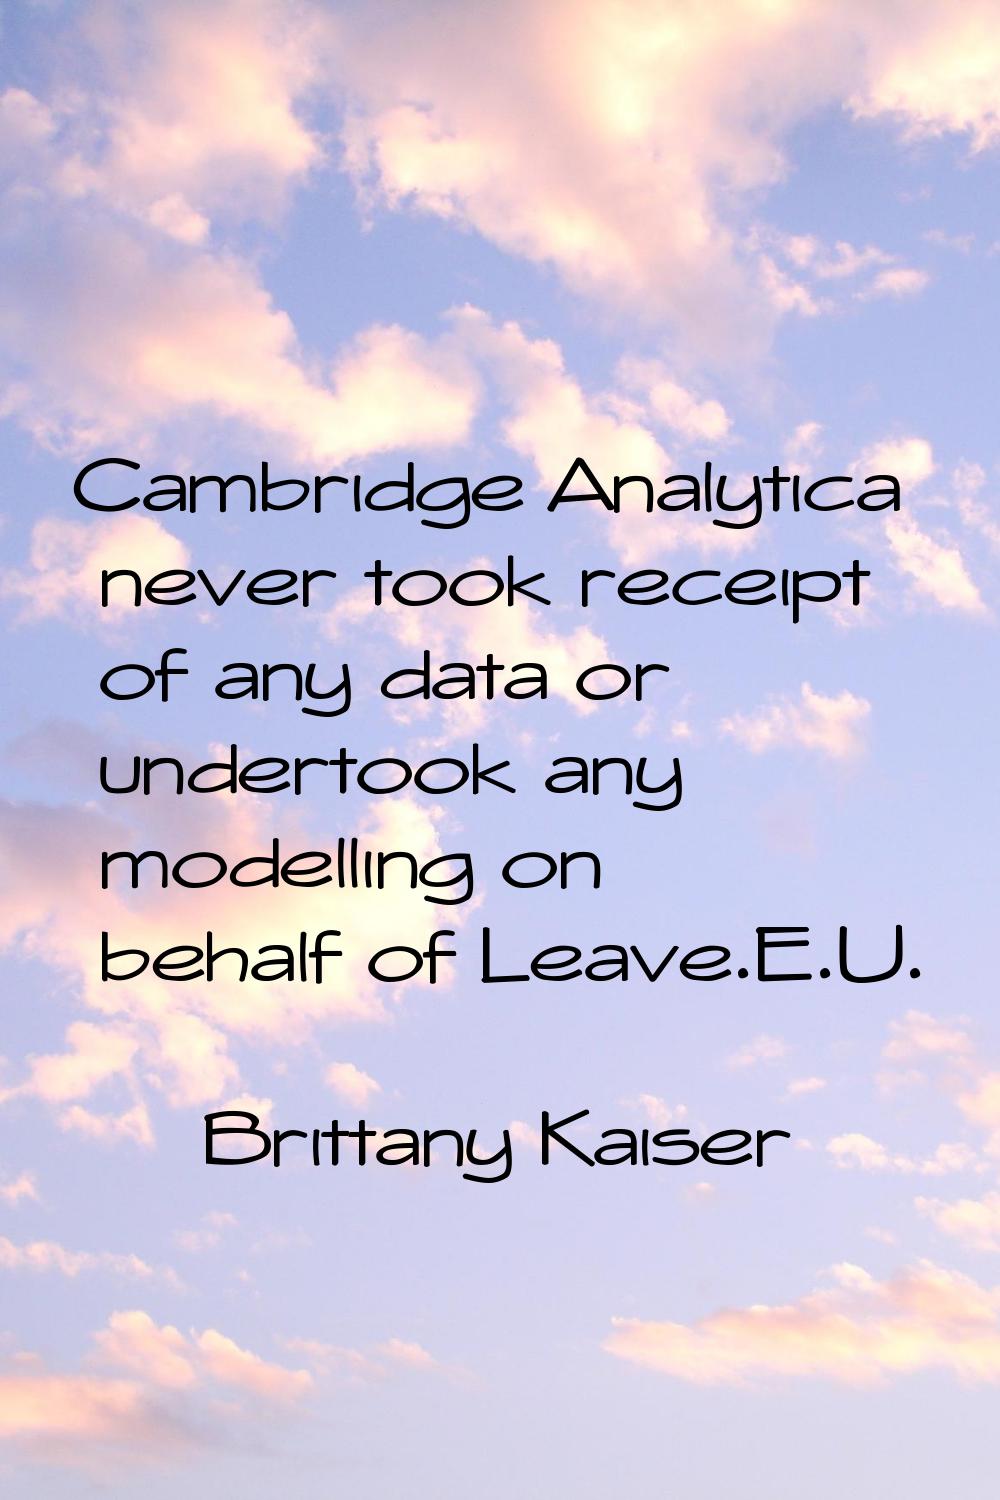 Cambridge Analytica never took receipt of any data or undertook any modelling on behalf of Leave.E.